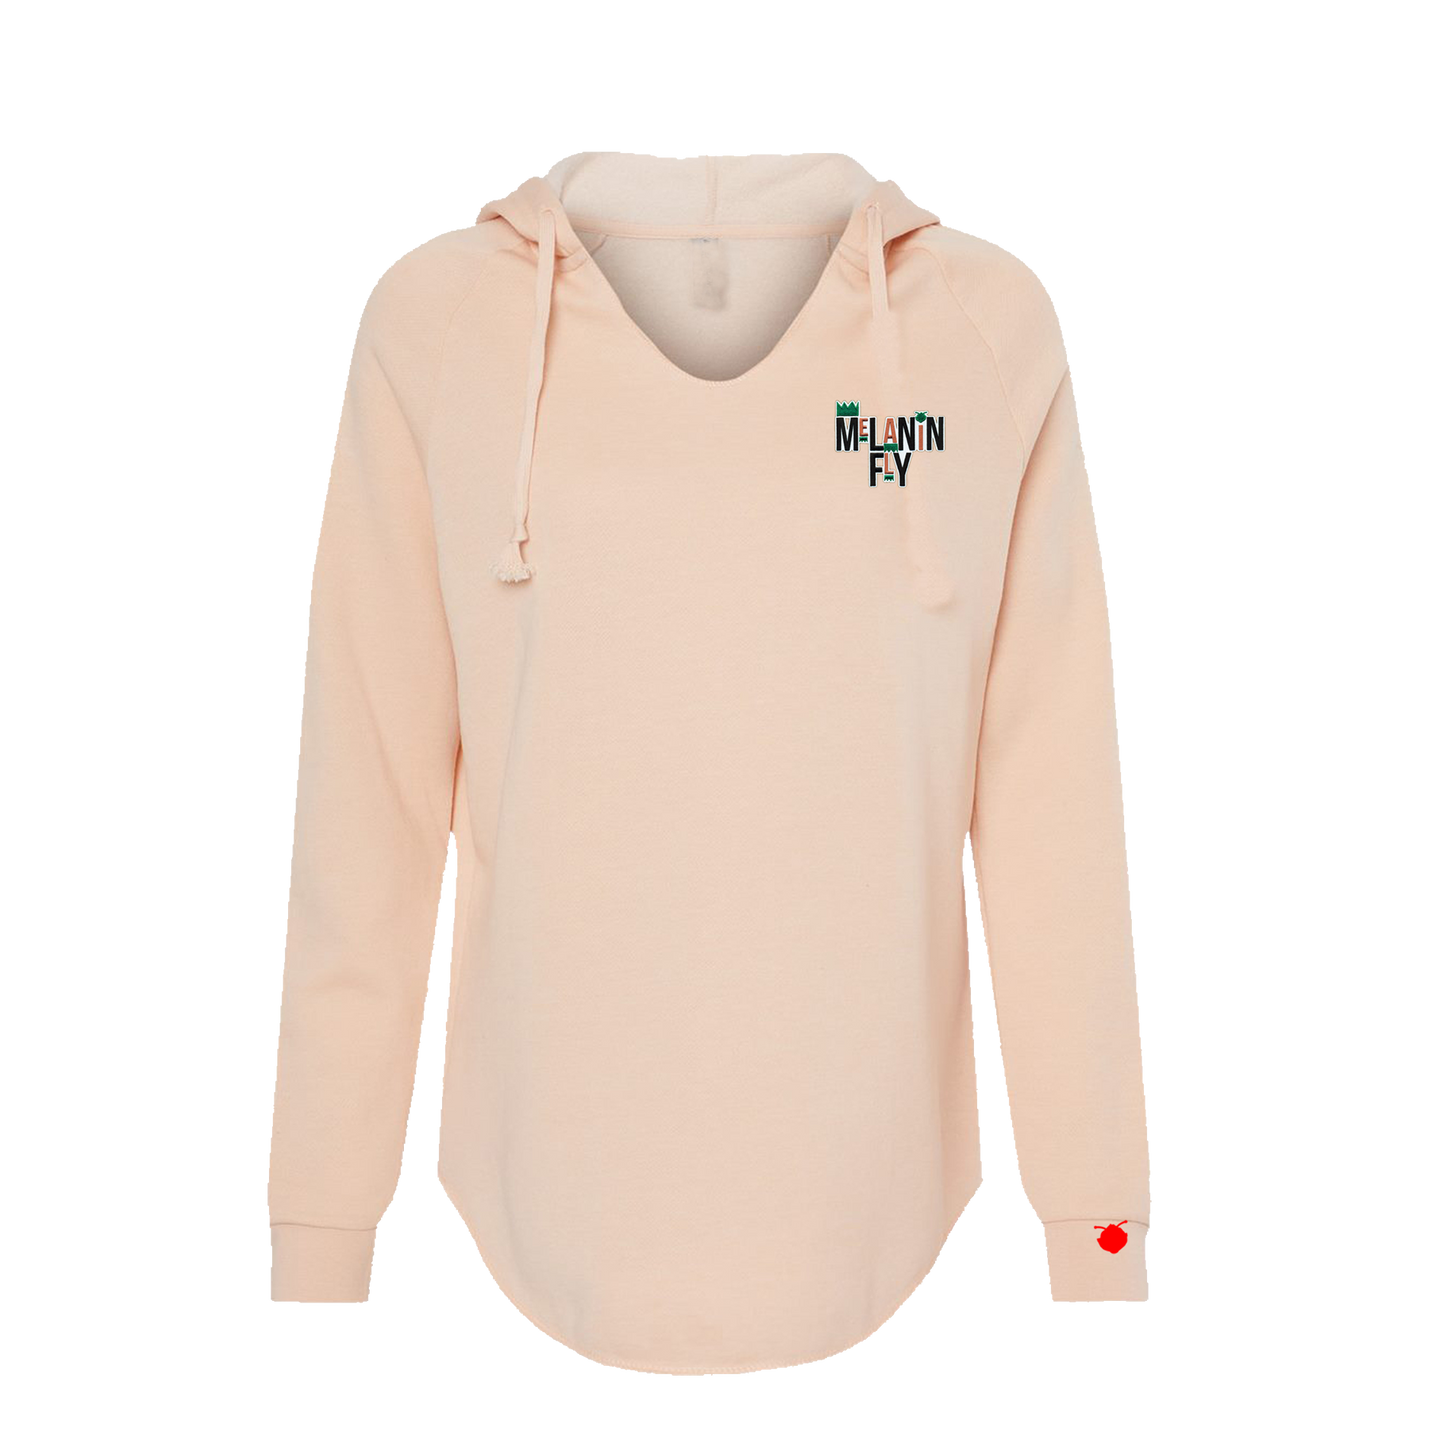 Melanin Fly Words Embroidery Patch Wave Wash Wo's Pullover - Blush